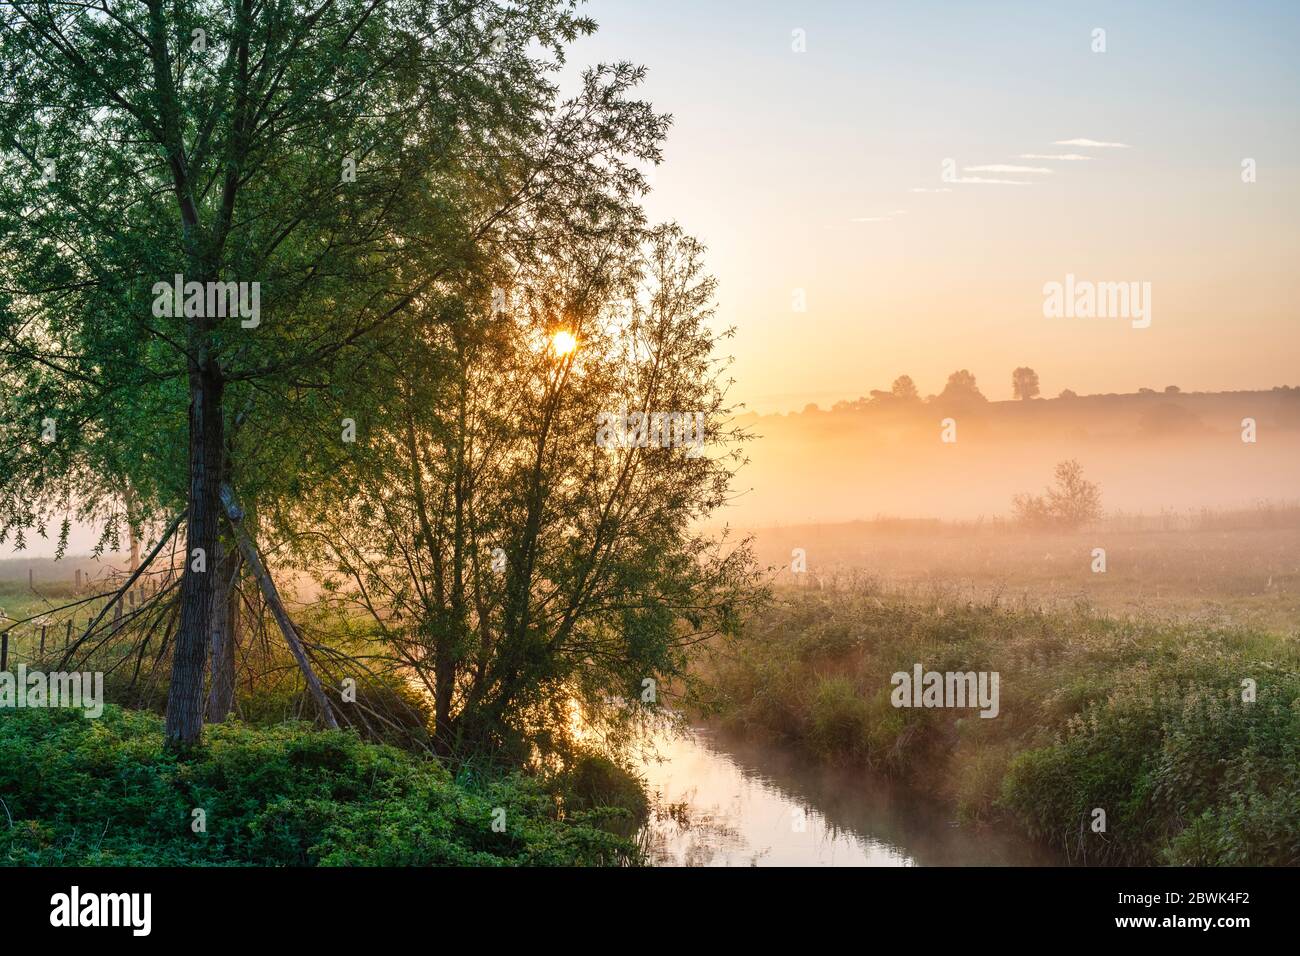 Misty sunrise along the river cherwell in spring. Somerton, Oxfordshire, England Stock Photo